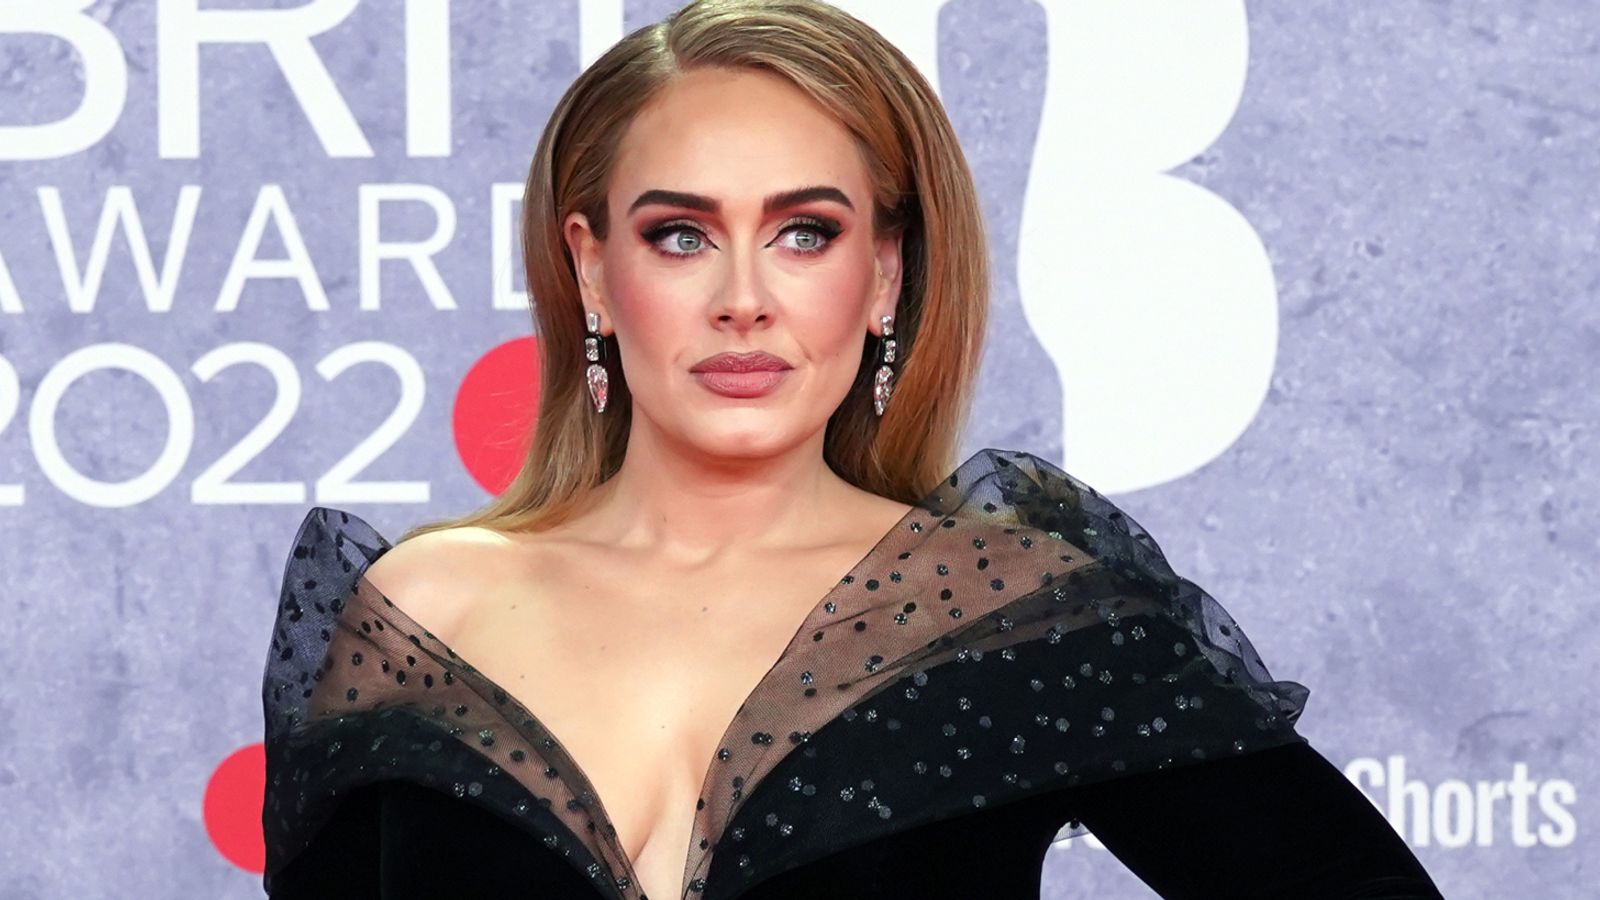 Adele announces new Las Vegas dates after cancelling previous residency |  Ents & Arts News | Sky News